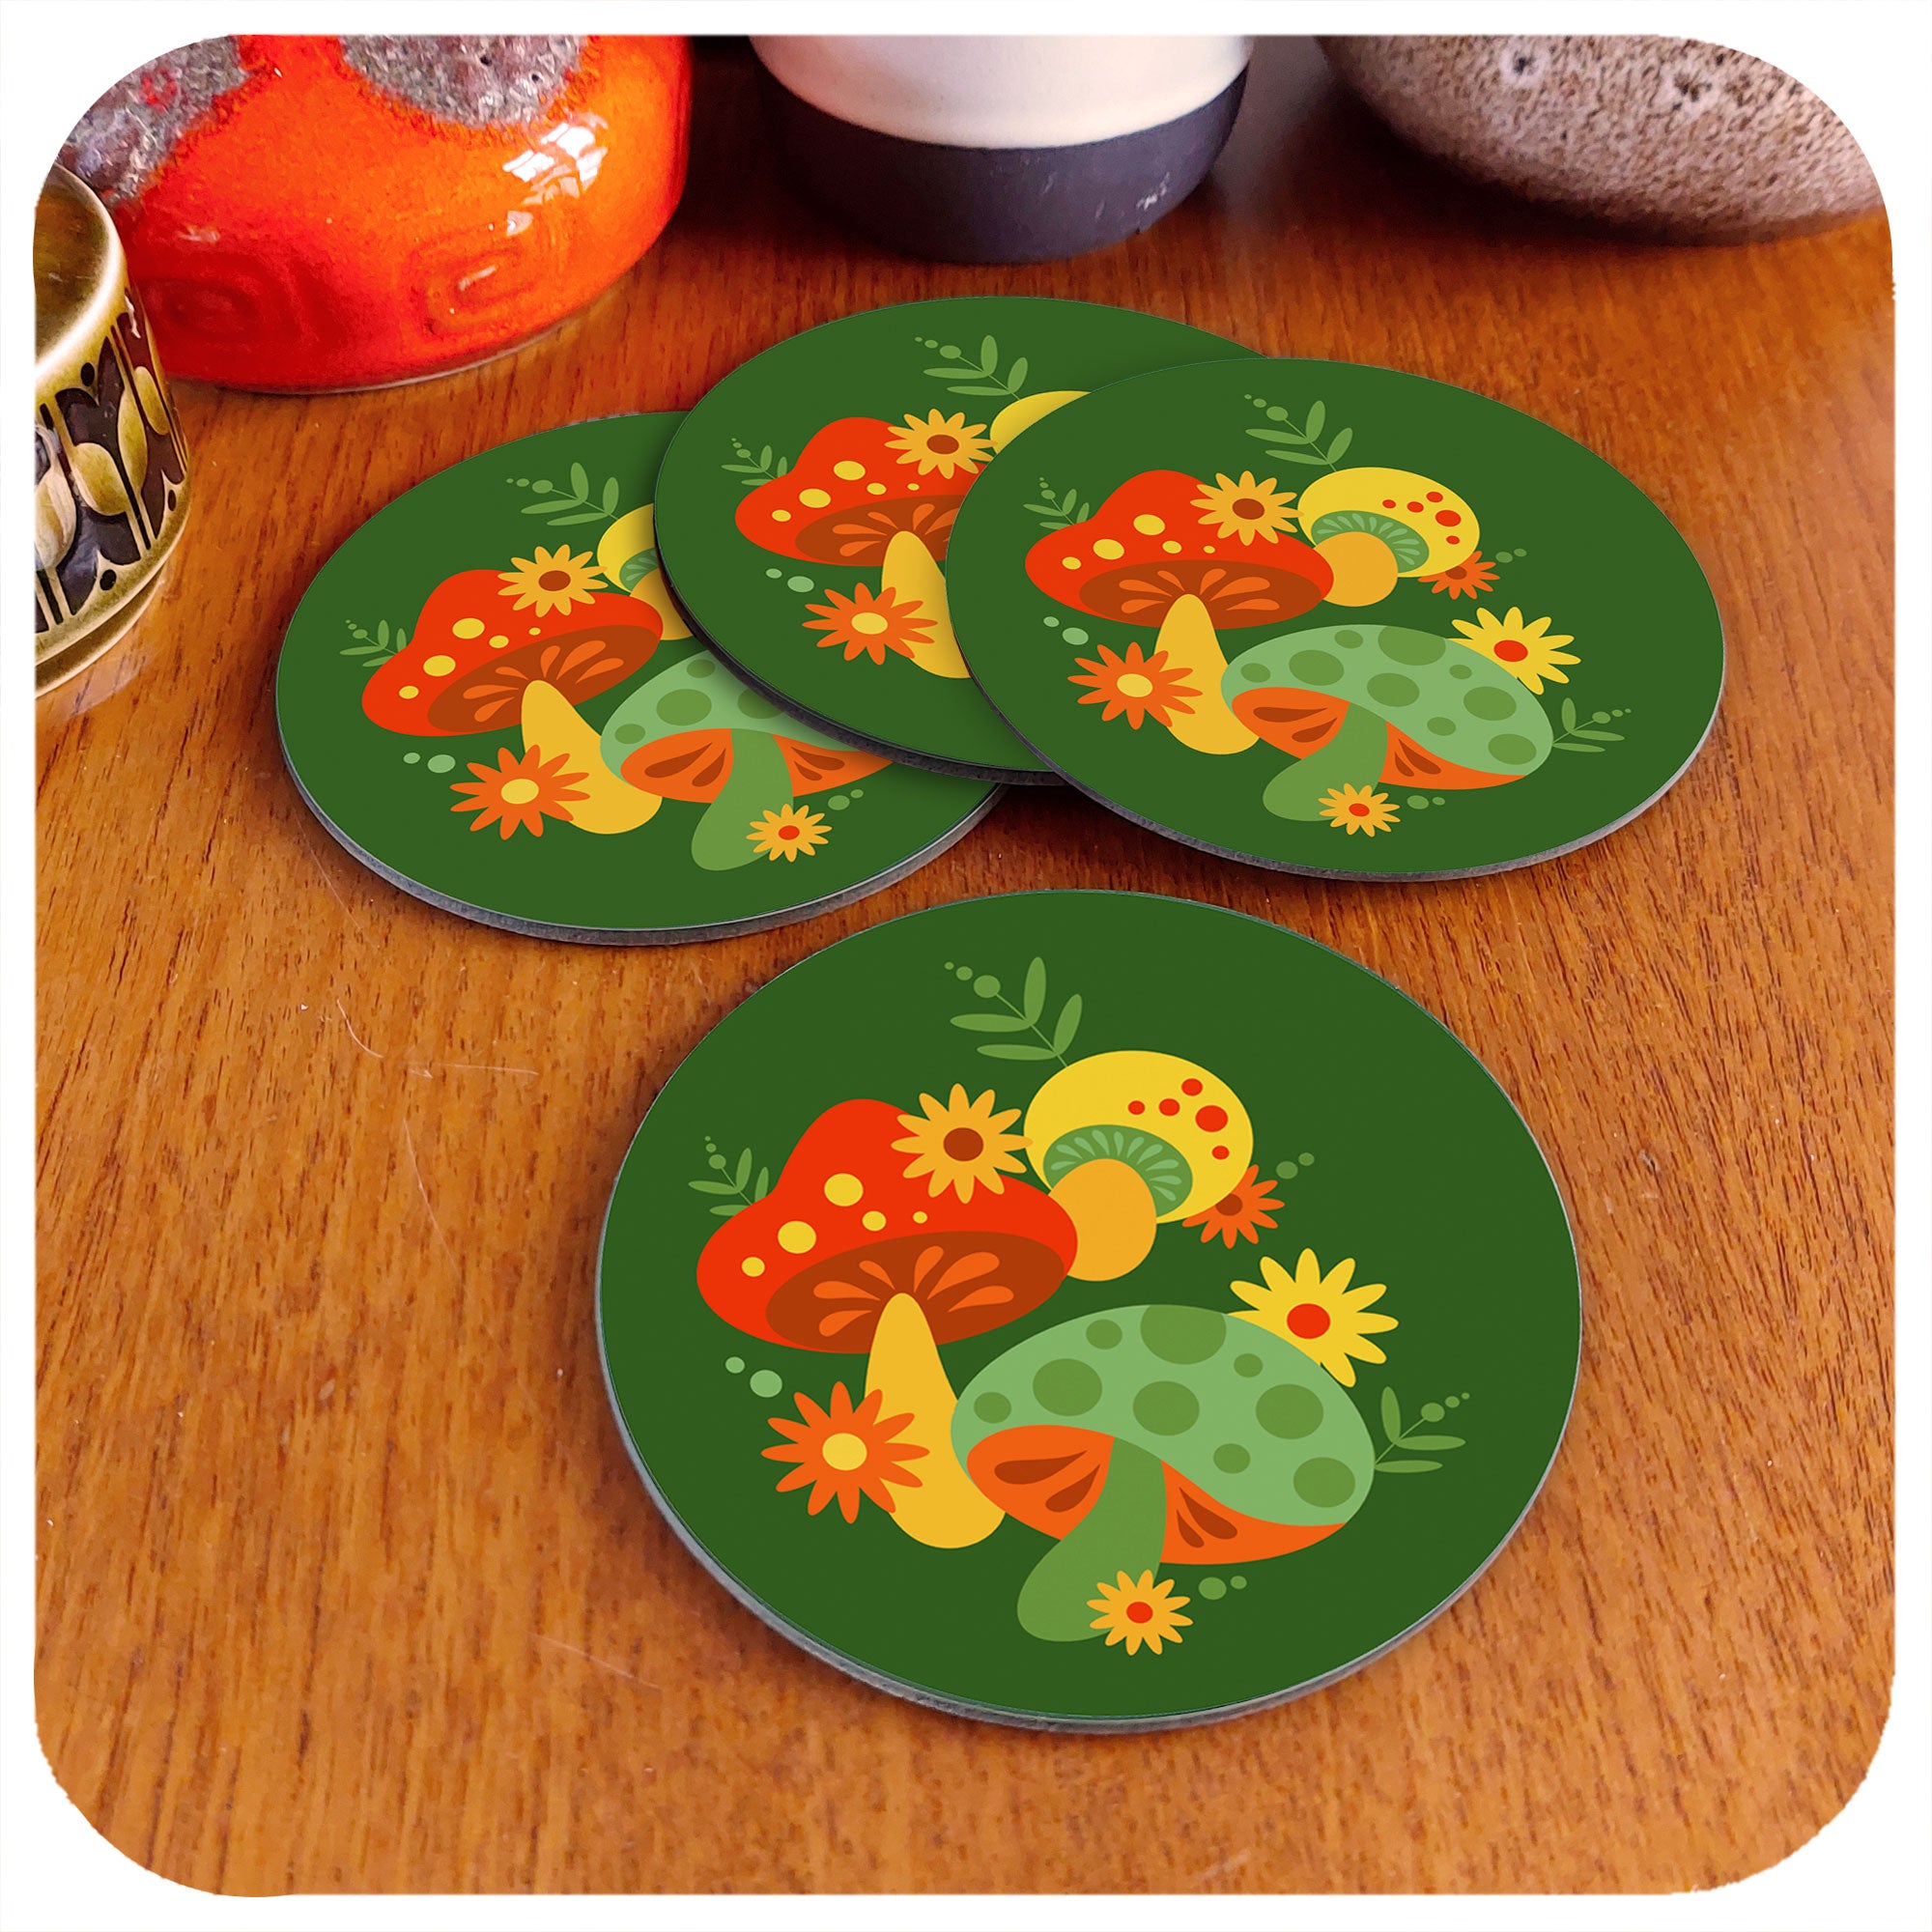 Set of 4 retro 70s style mushroom coasters lie on a teak table next to vintage Fat Lava and Hornsea pottery jugs | The Inkabilly Emporium